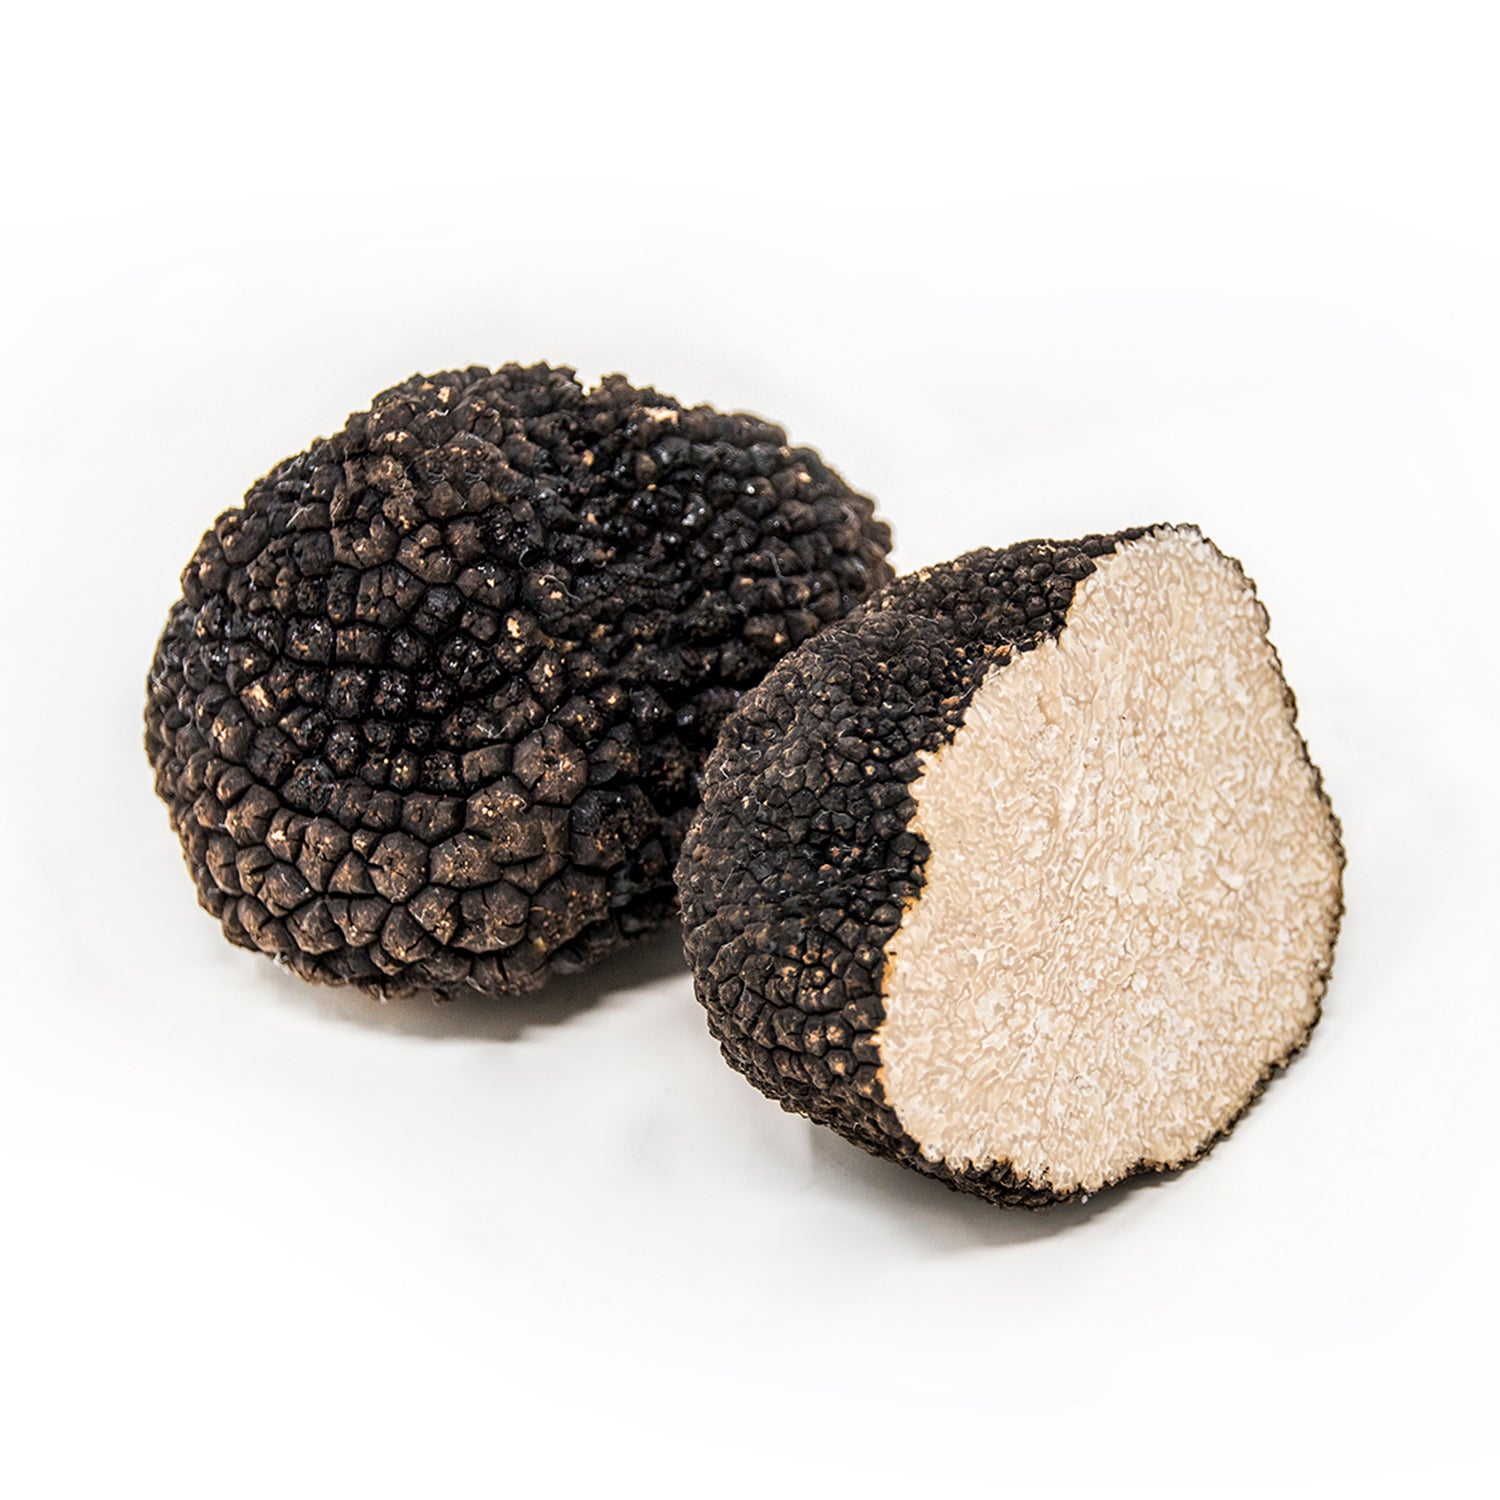 Black truffles directly from Ayme truffle in France - Tuber aestivum